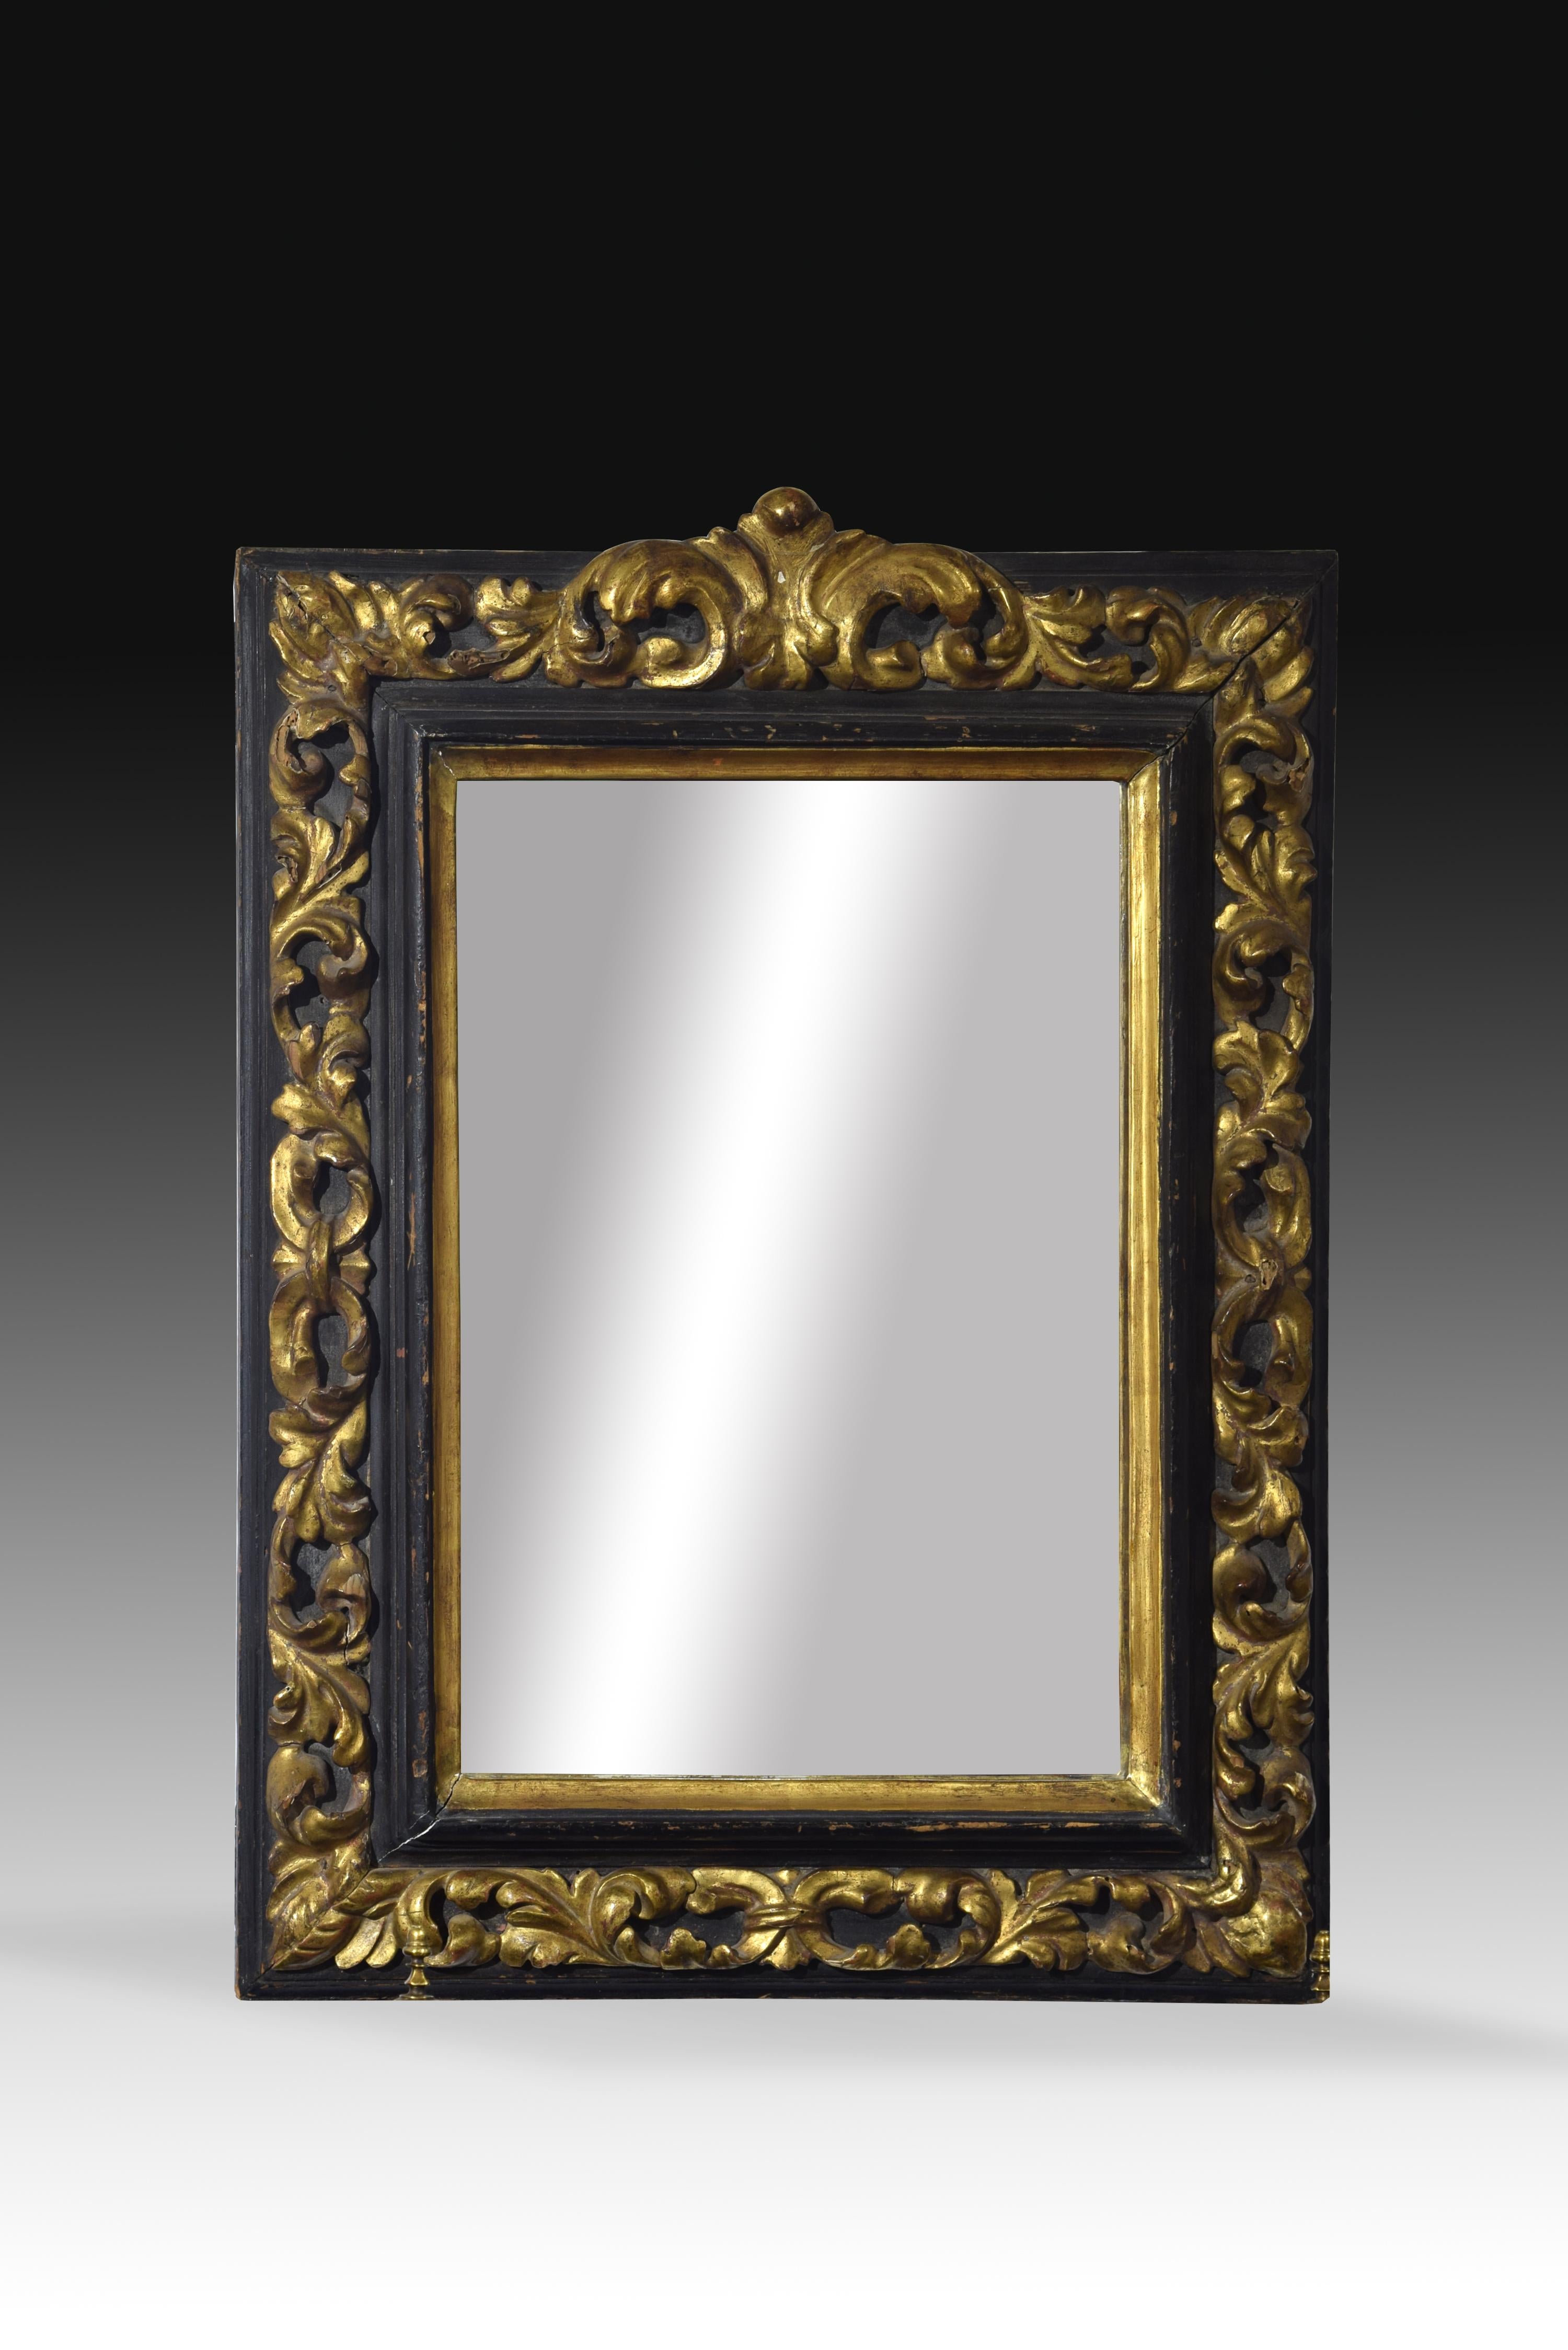 Rectangular frame made of carved and polychrome wood, decorated on the front with plant elements, larger and with more volume in the upper central part, as was usual in these examples, leaving these golden motifs standing out against the dark